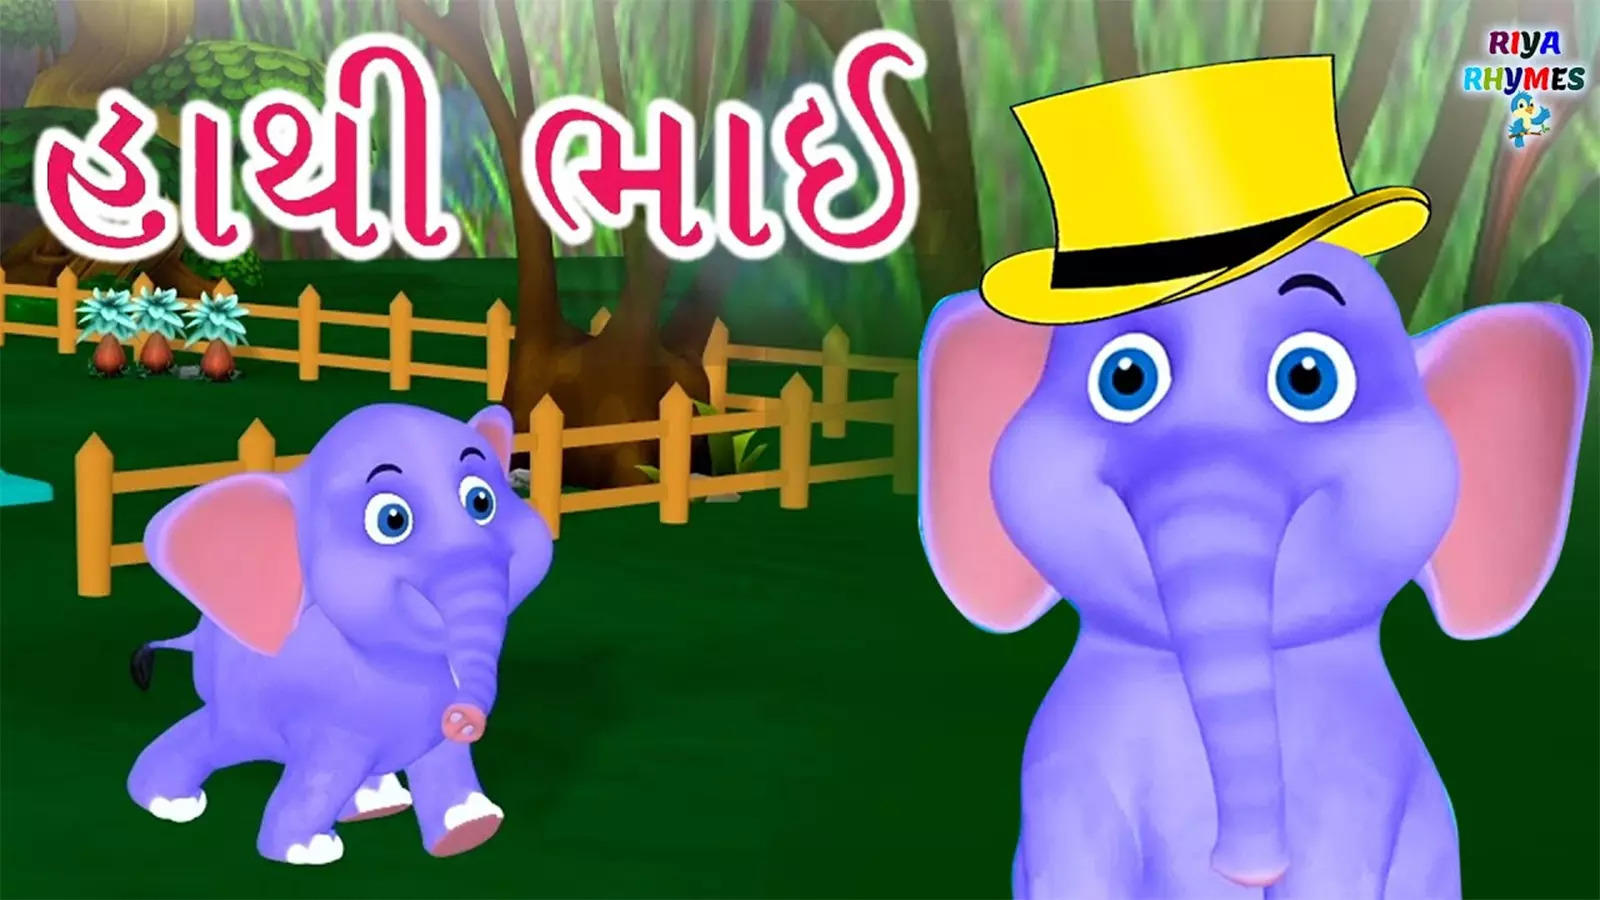 Watch Popular Children Gujarati Nursery Rhyme 'Haathi Bhai Toh Jada' For  Kids - Check Out Fun Kids Nursery Rhymes And Baby Songs In Gujarati |  Entertainment - Times of India Videos